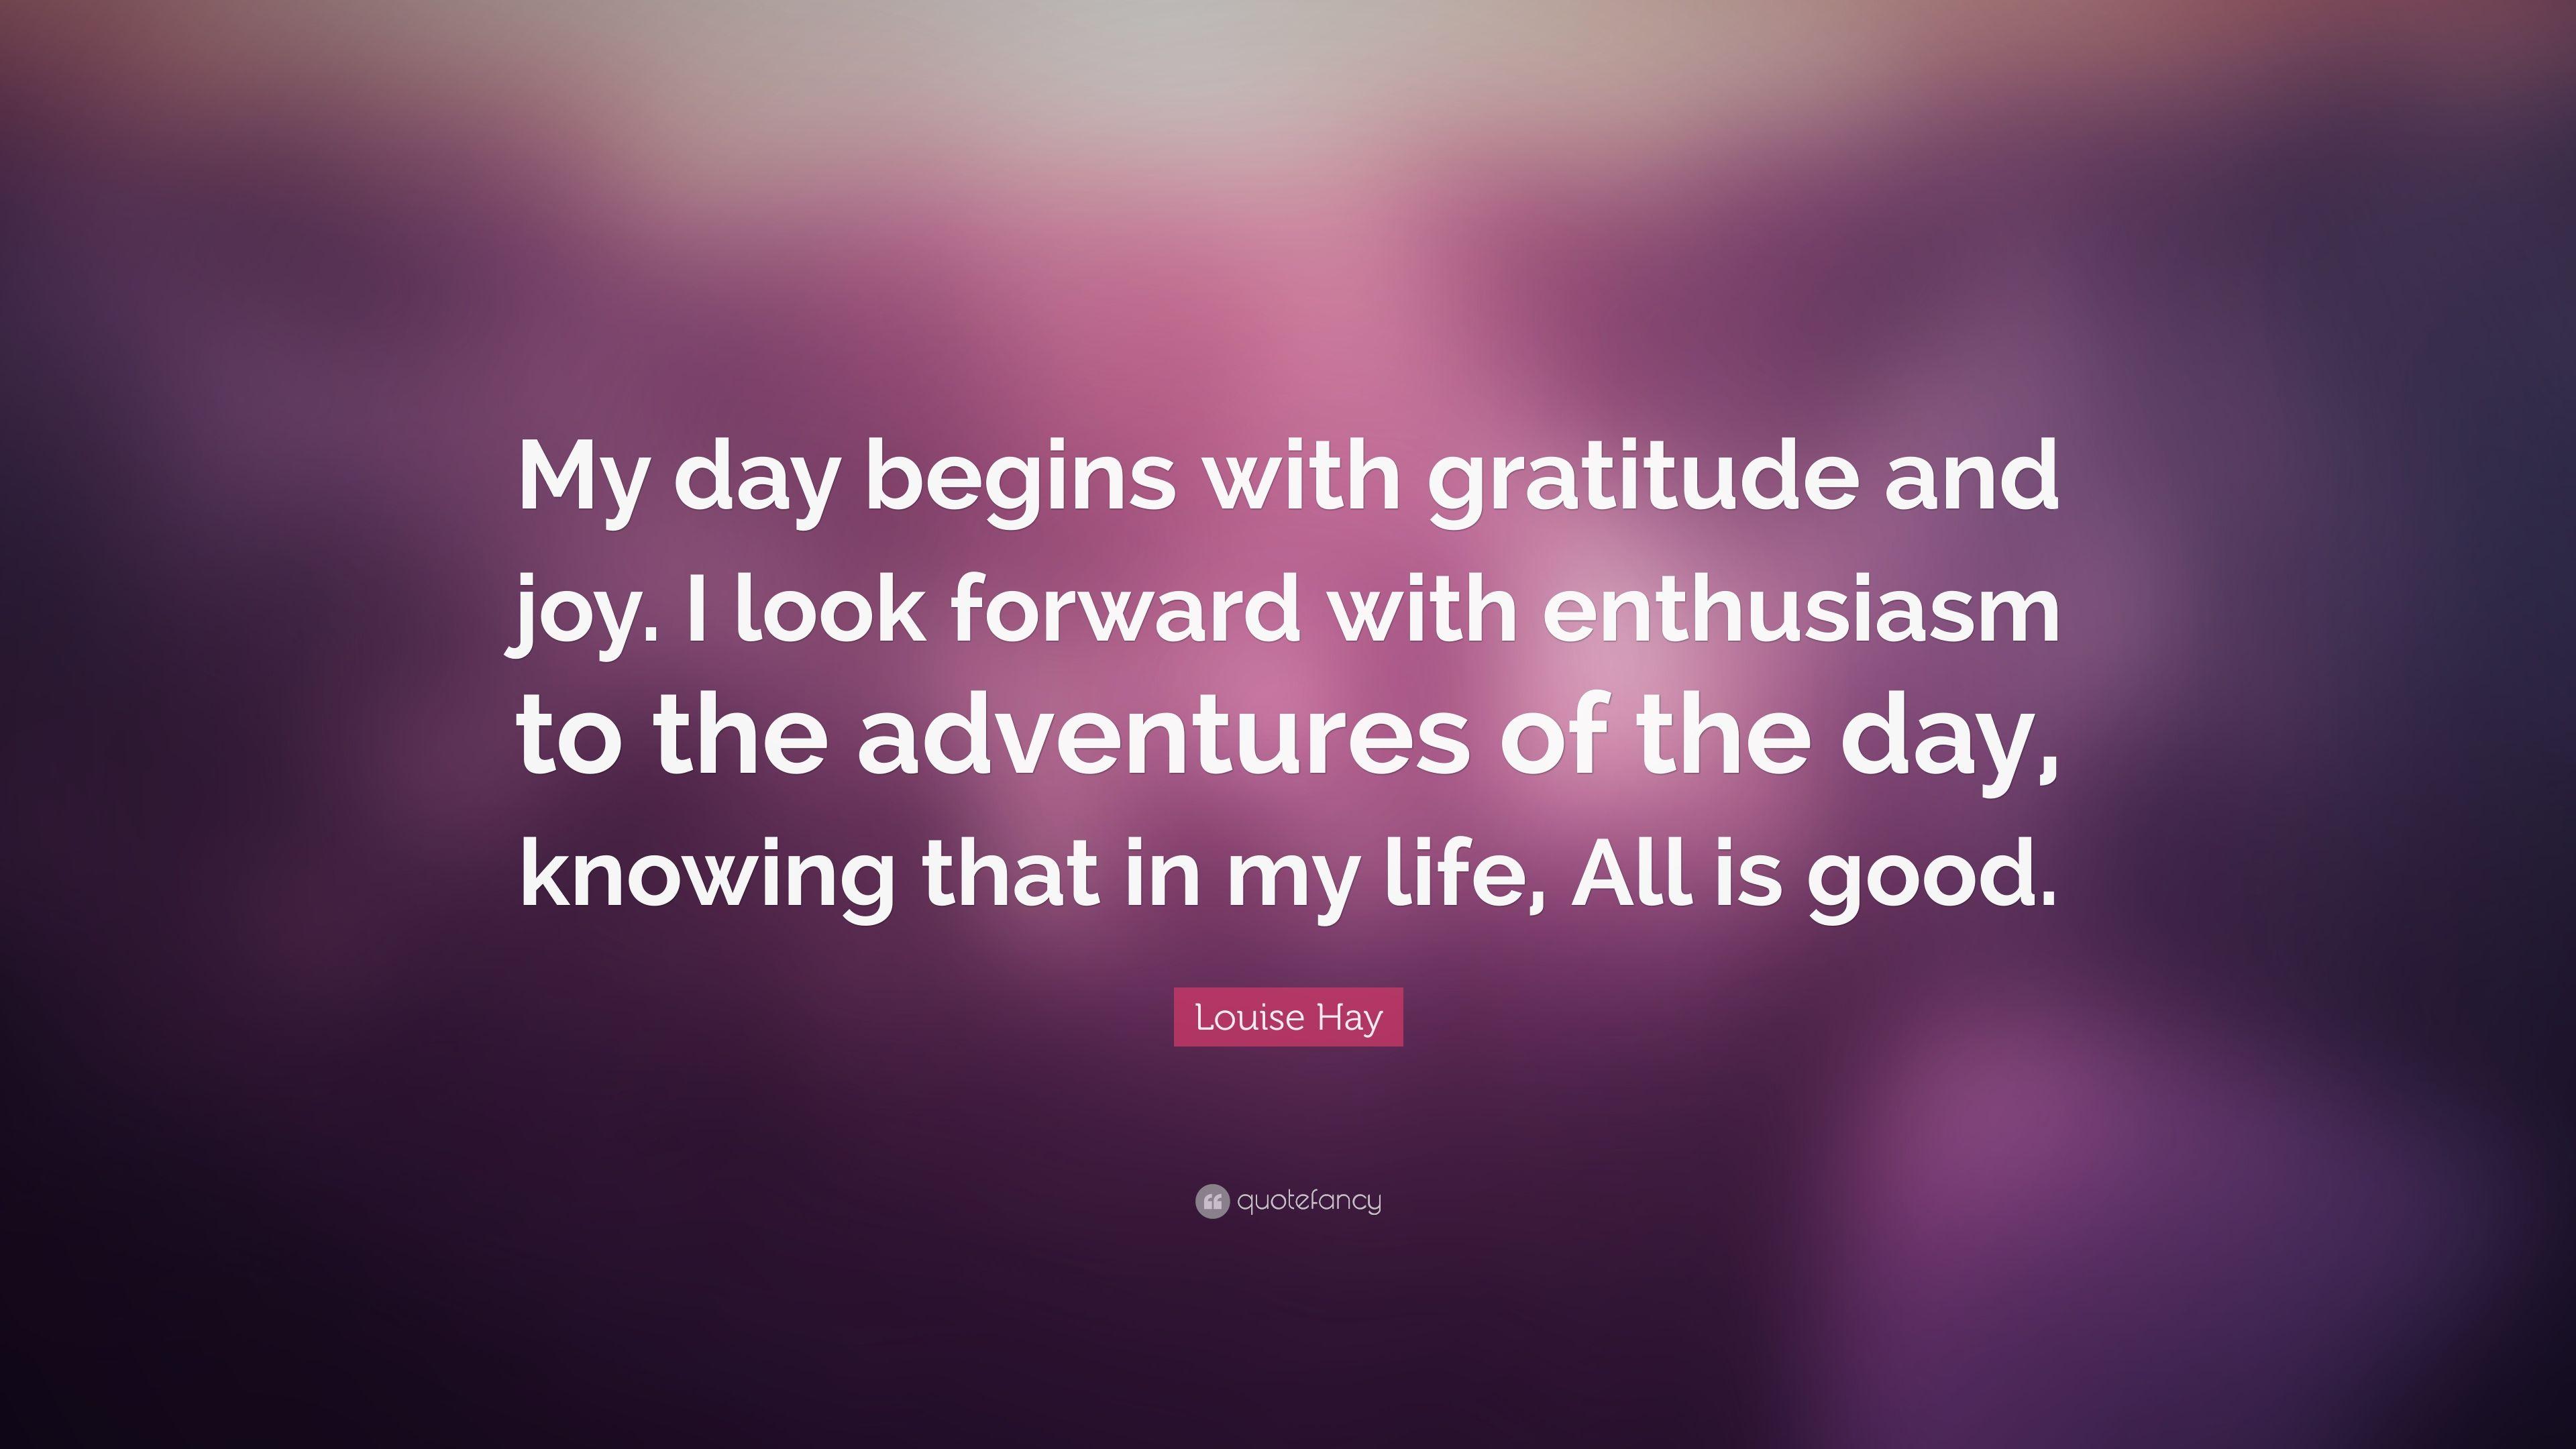 Louise Hay Quote: “My day begins with gratitude and joy. I look